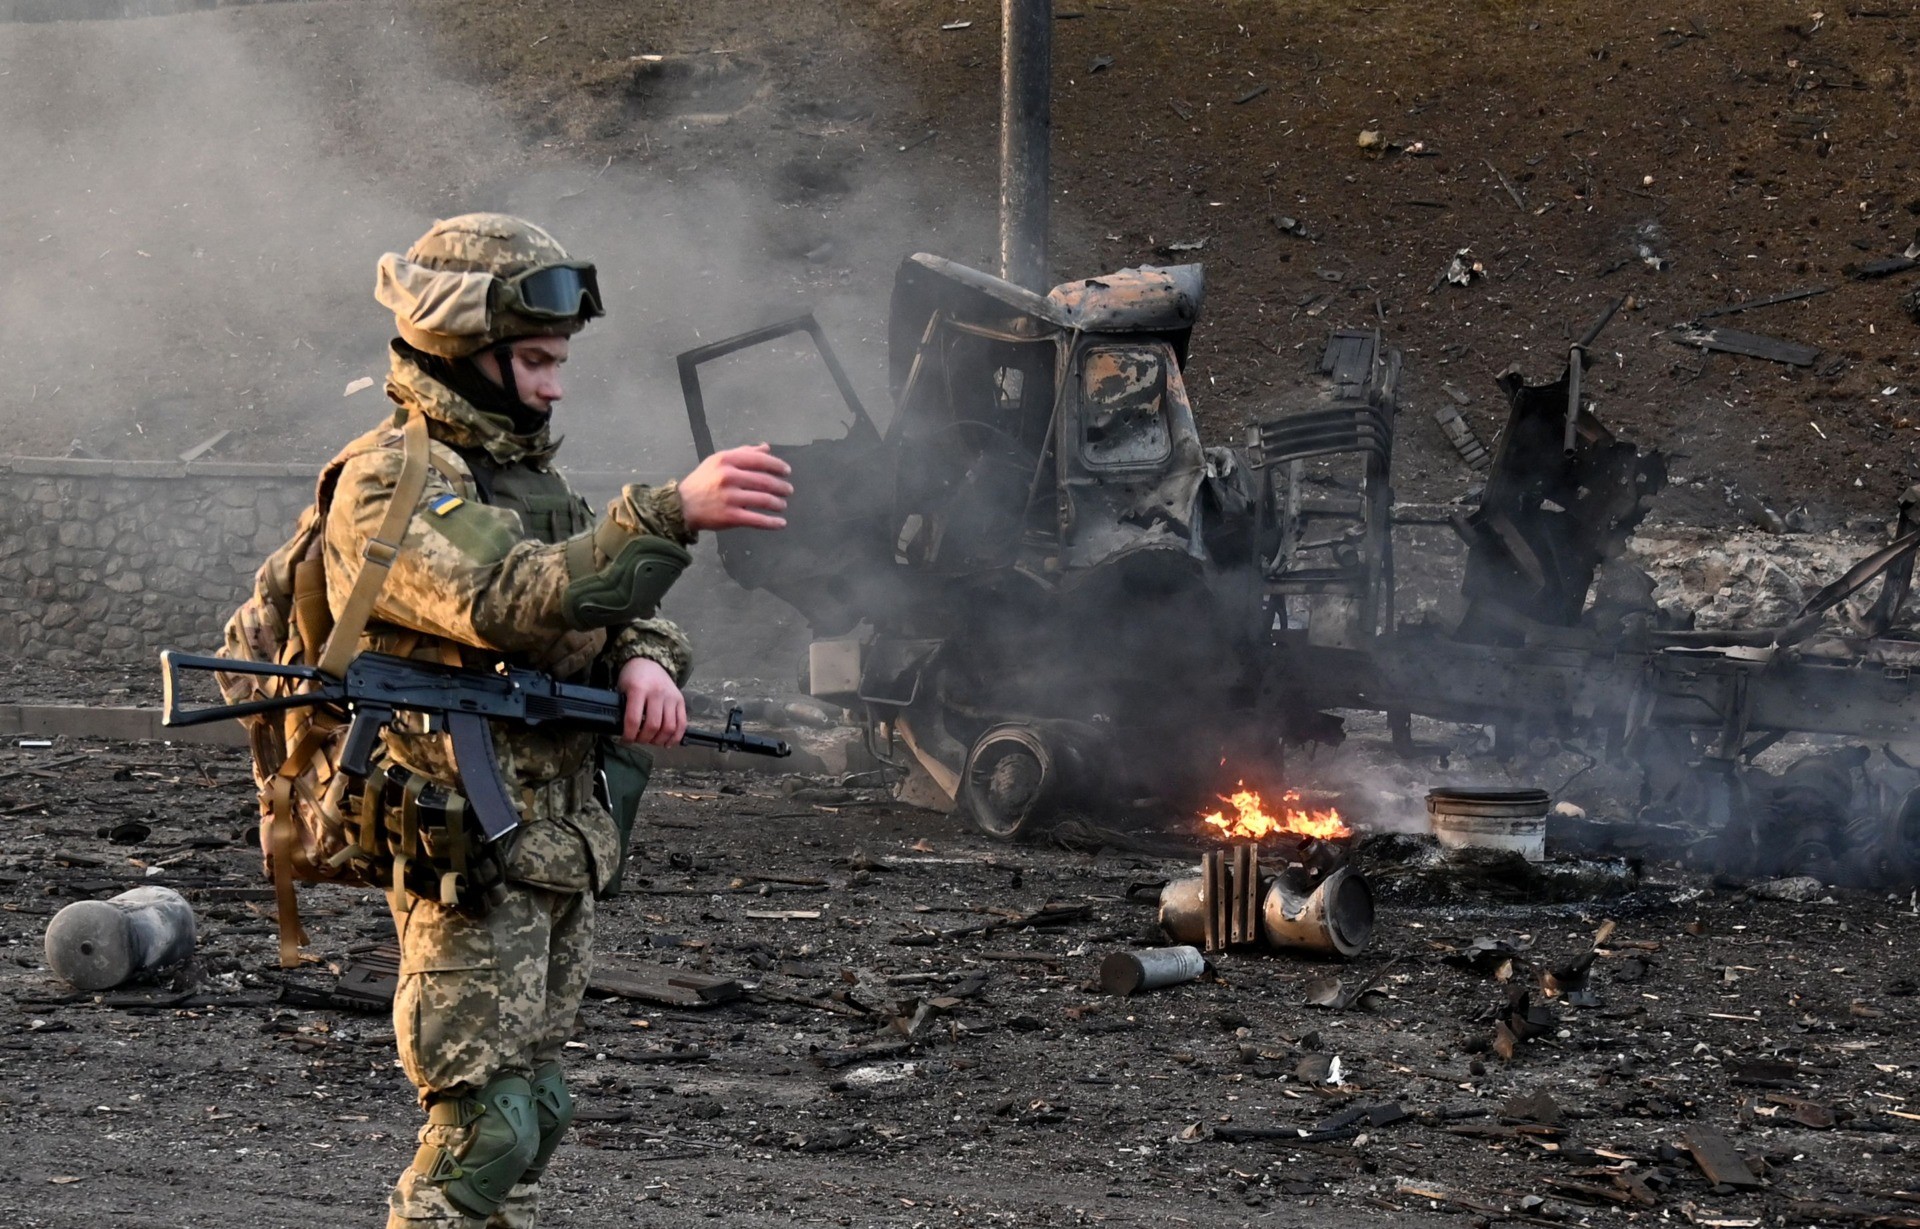 The Heat of Battle: Russia and Ukraine Clash in Hot and Heavy Photos